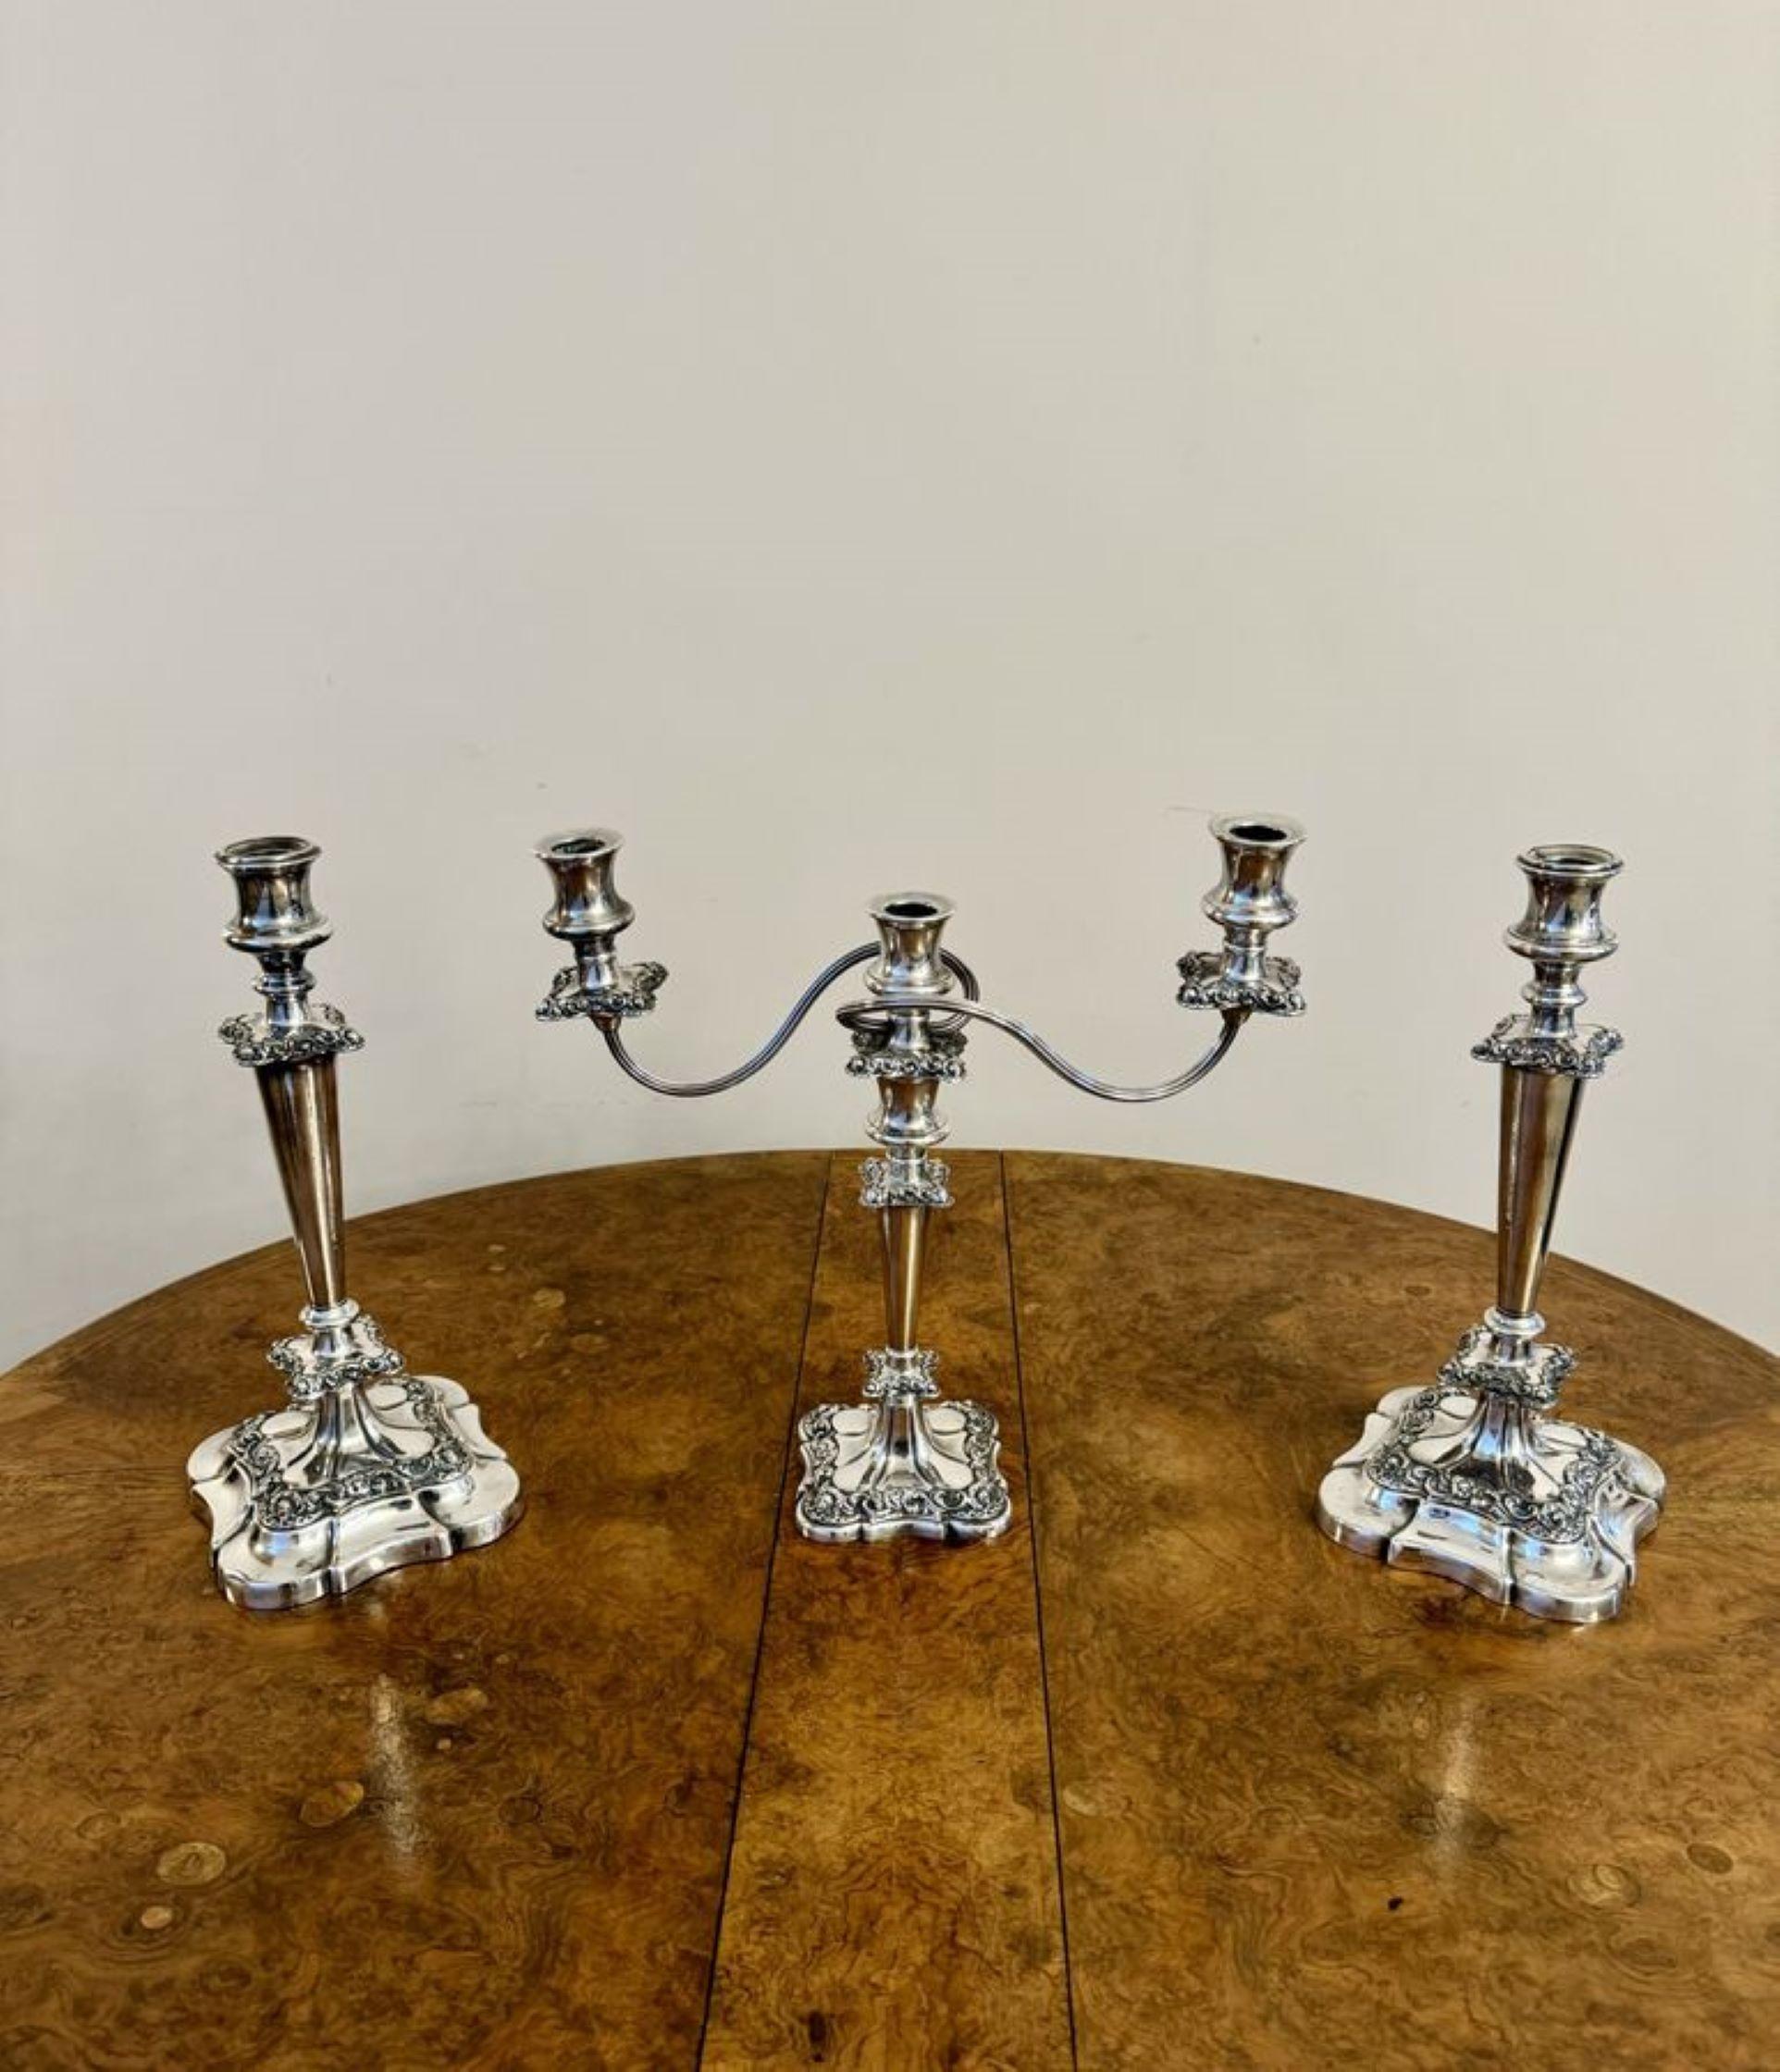 Outstanding quality antique Victorian ornate silver plated candelabra and candlestick set having a fine quality antique Victorian silver plated candelabra accompanied by the matching pair of candlesticks, the candelabra having three light branches,